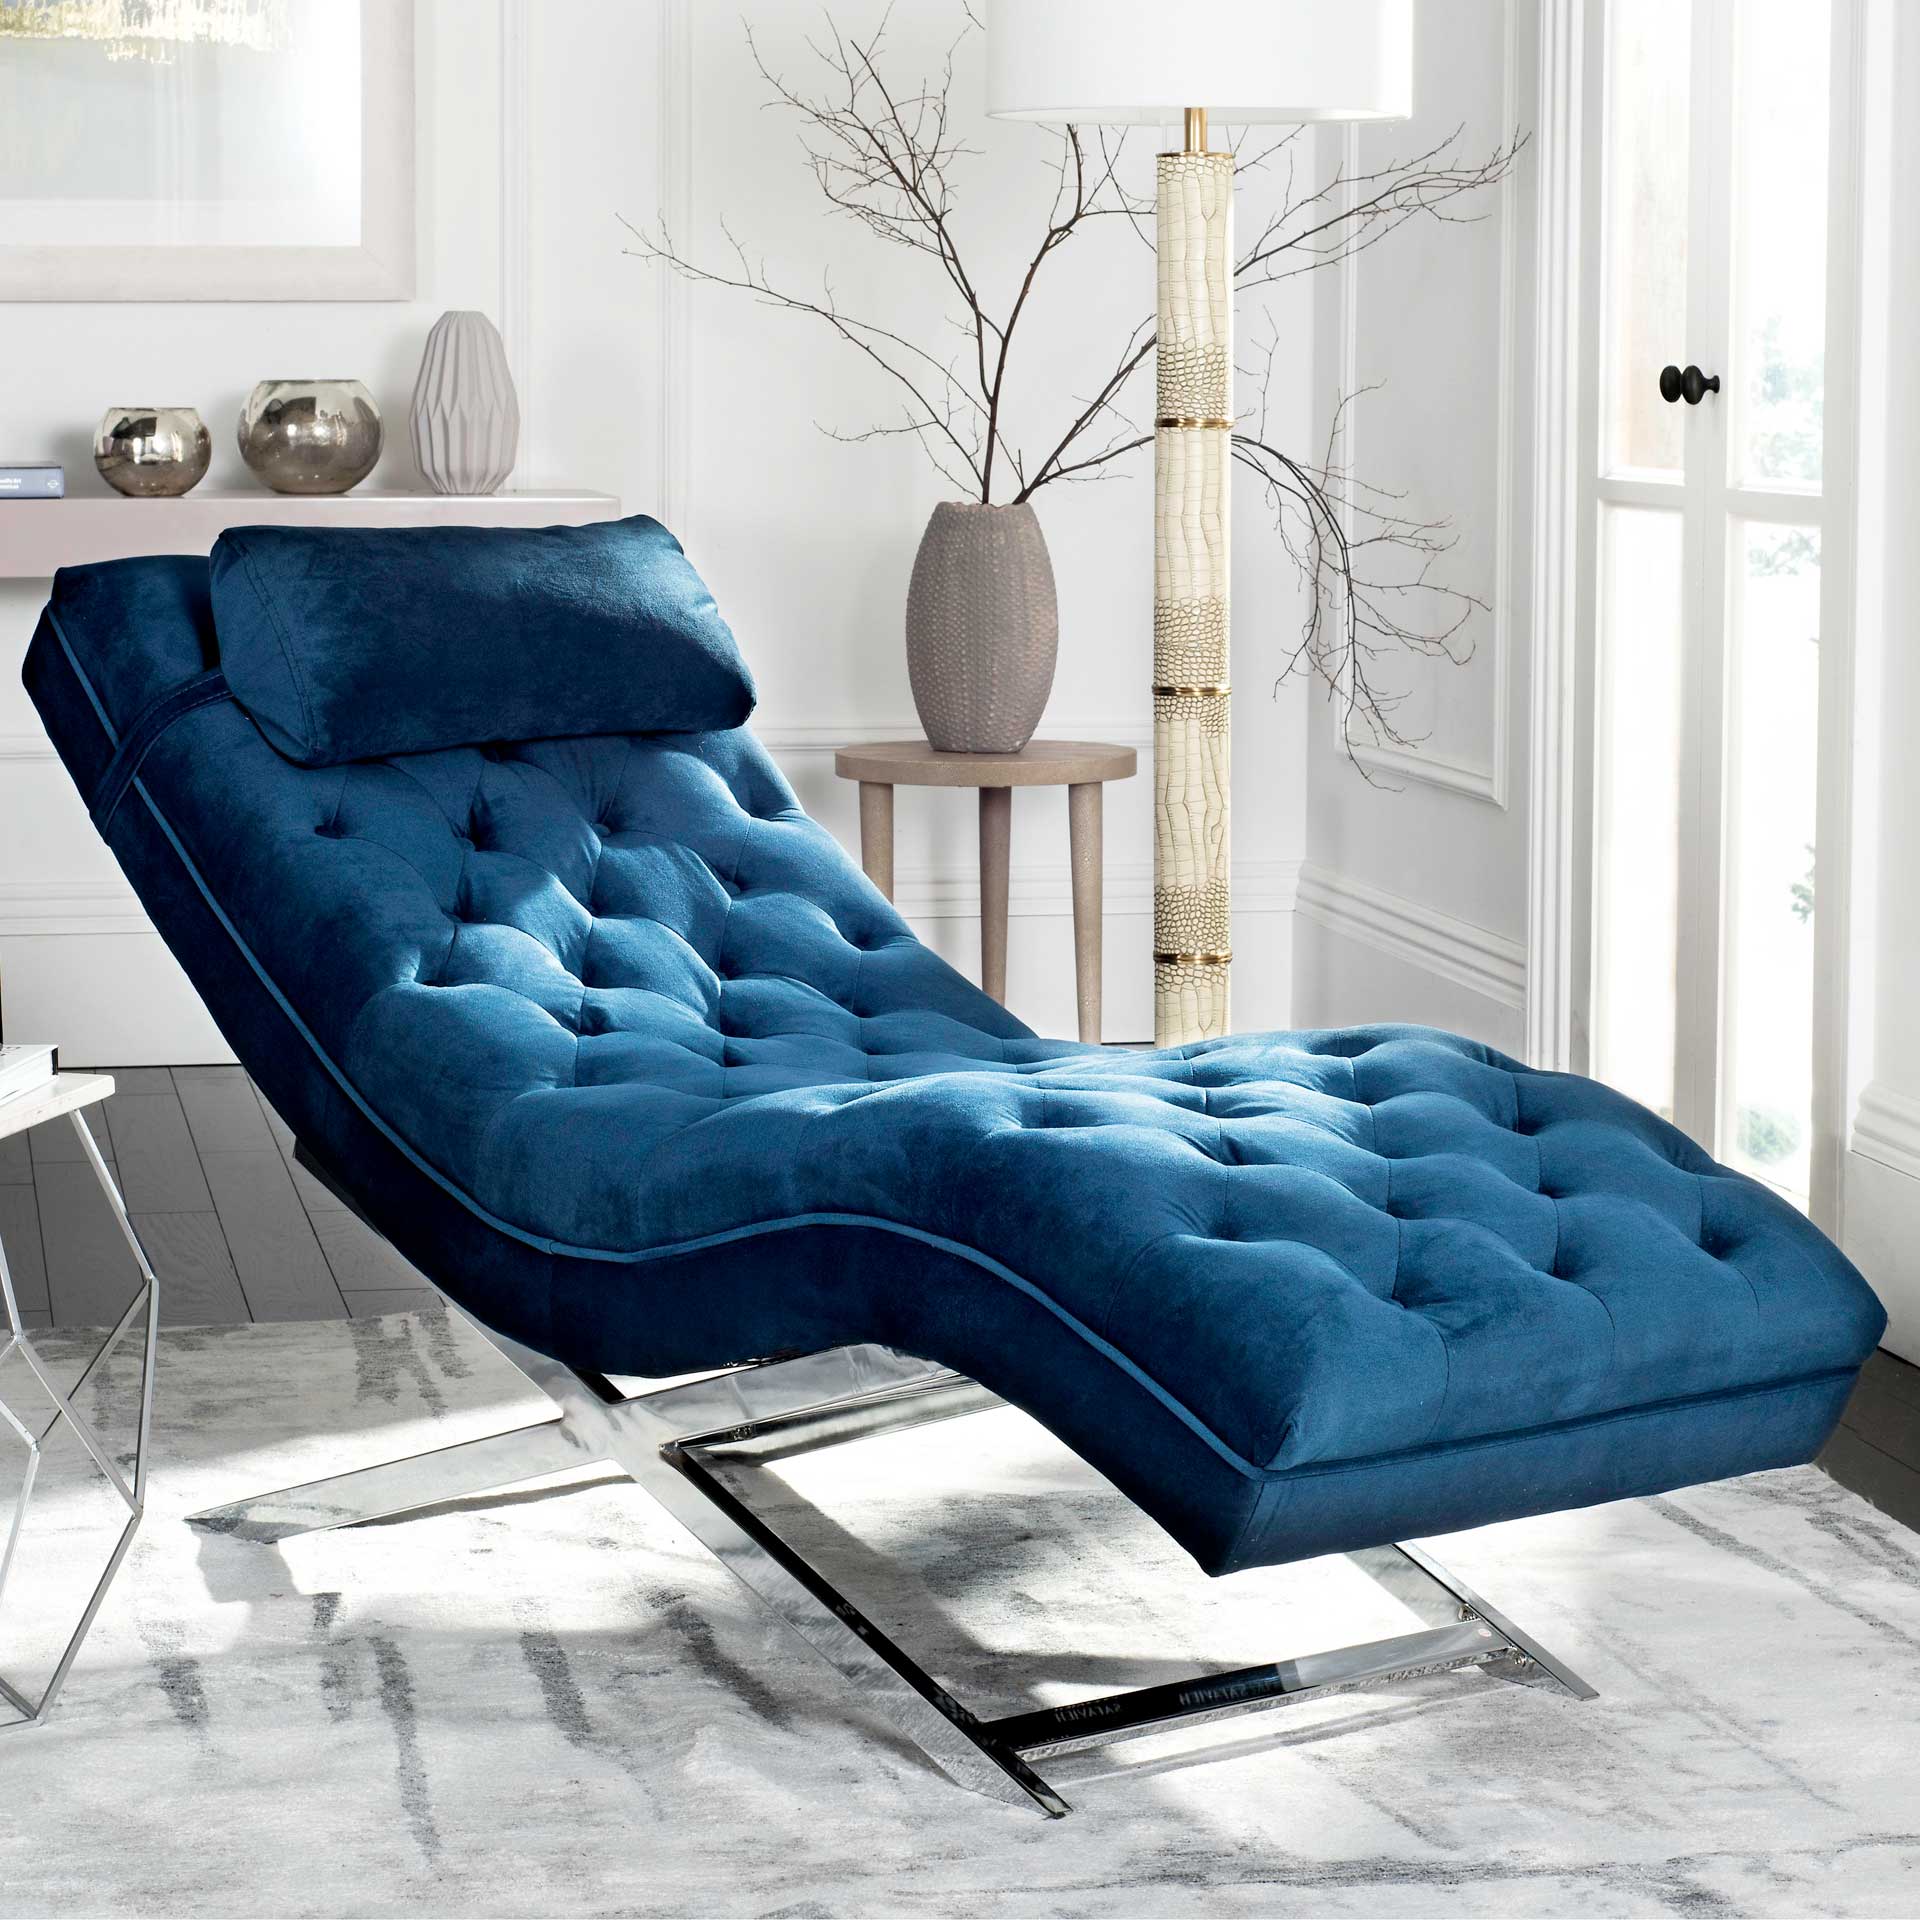 Morph Chaise With Headrest Pillow Navy